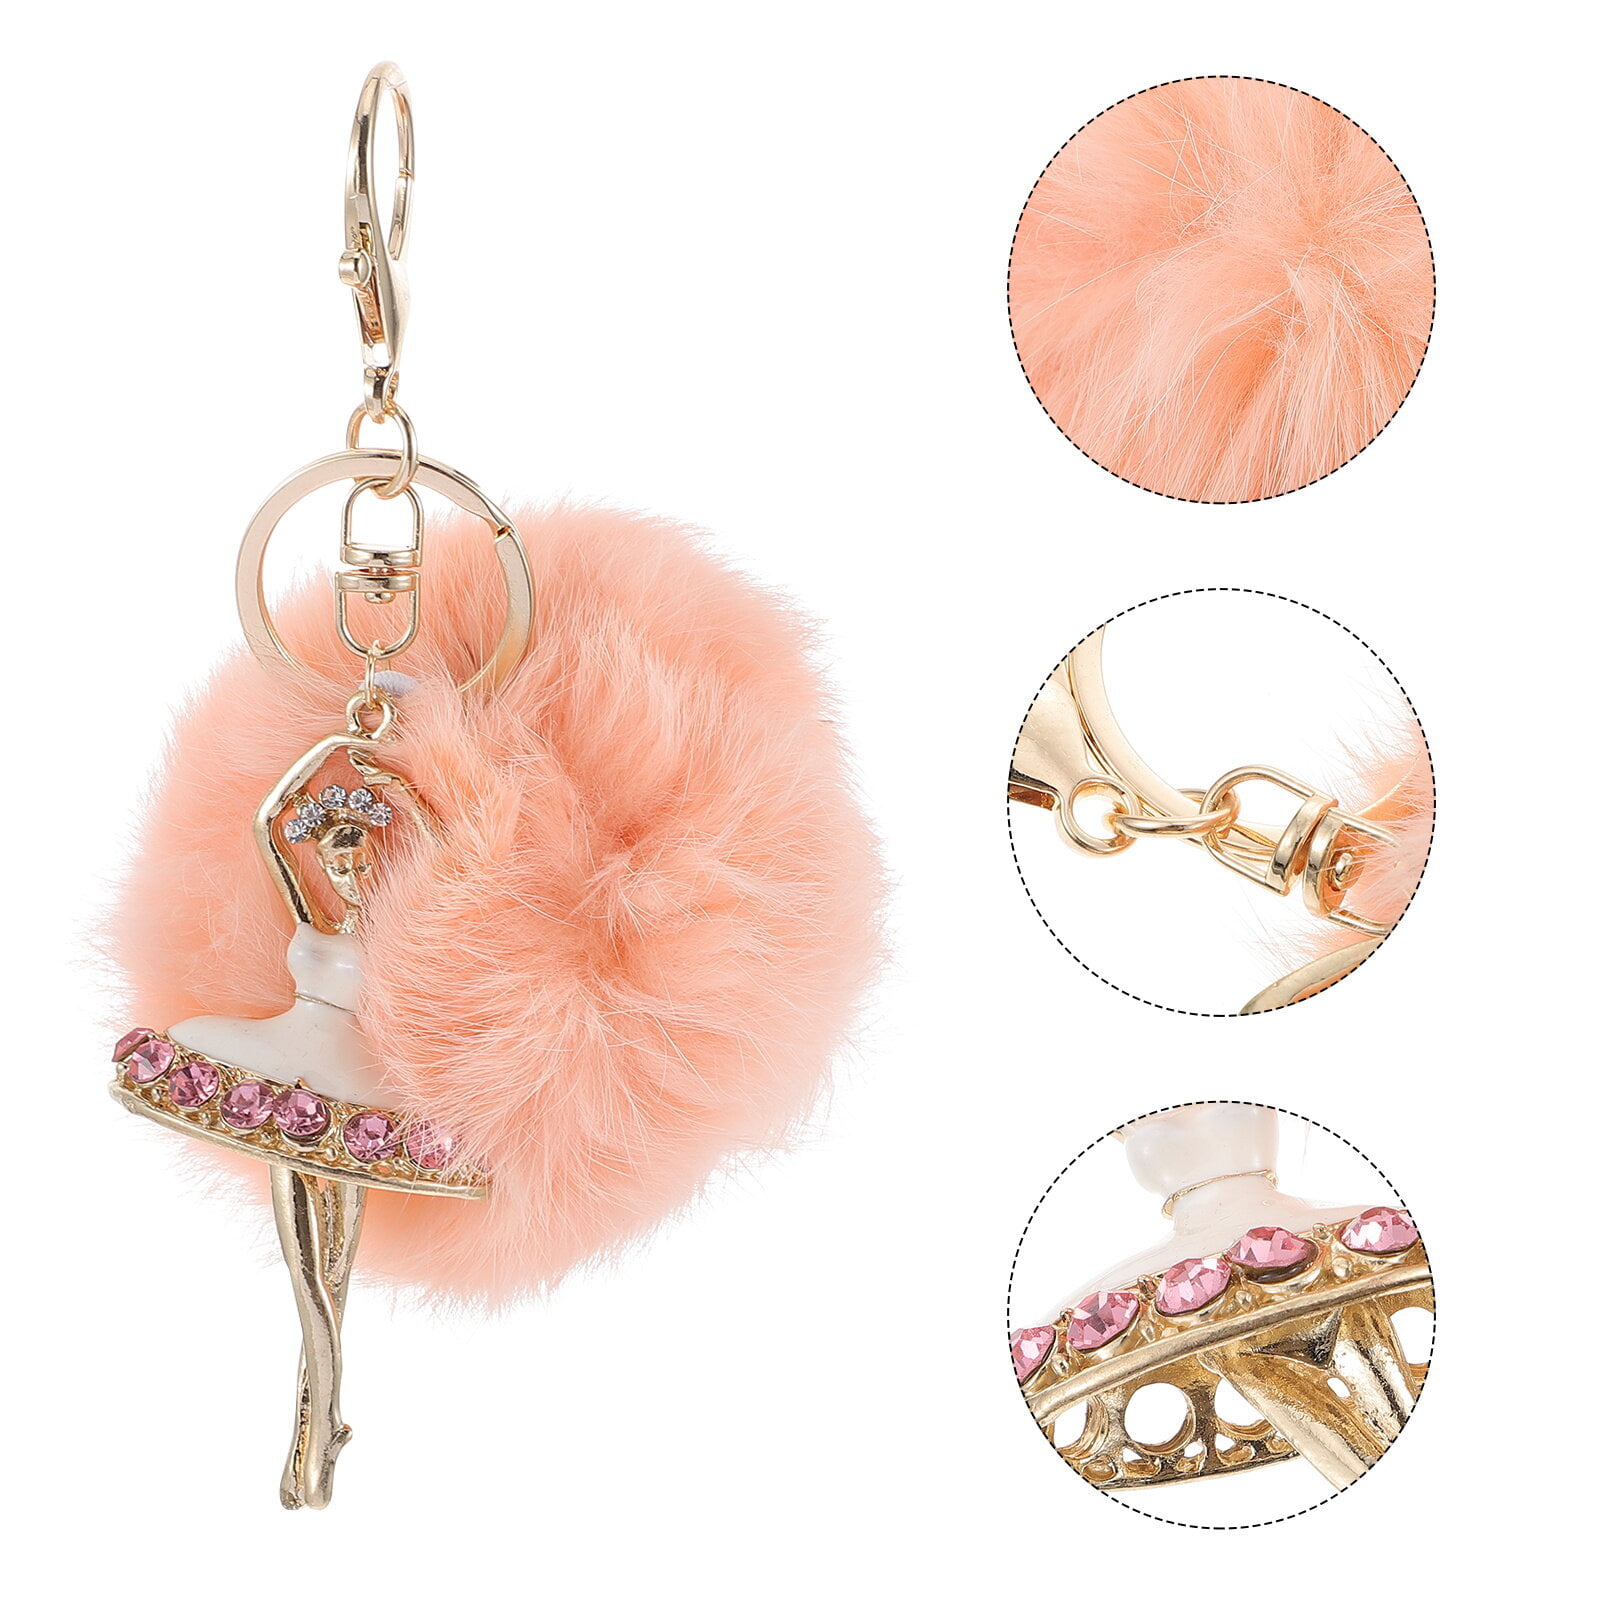 6Pcs Pom Pom Keychains incl. 1 Compact Travel Makeup Mirror Cute Puff Ball Keychain  Bulk for Women Girls Hand Bag Backpack Charm Key Rings (Mix6 #1) 